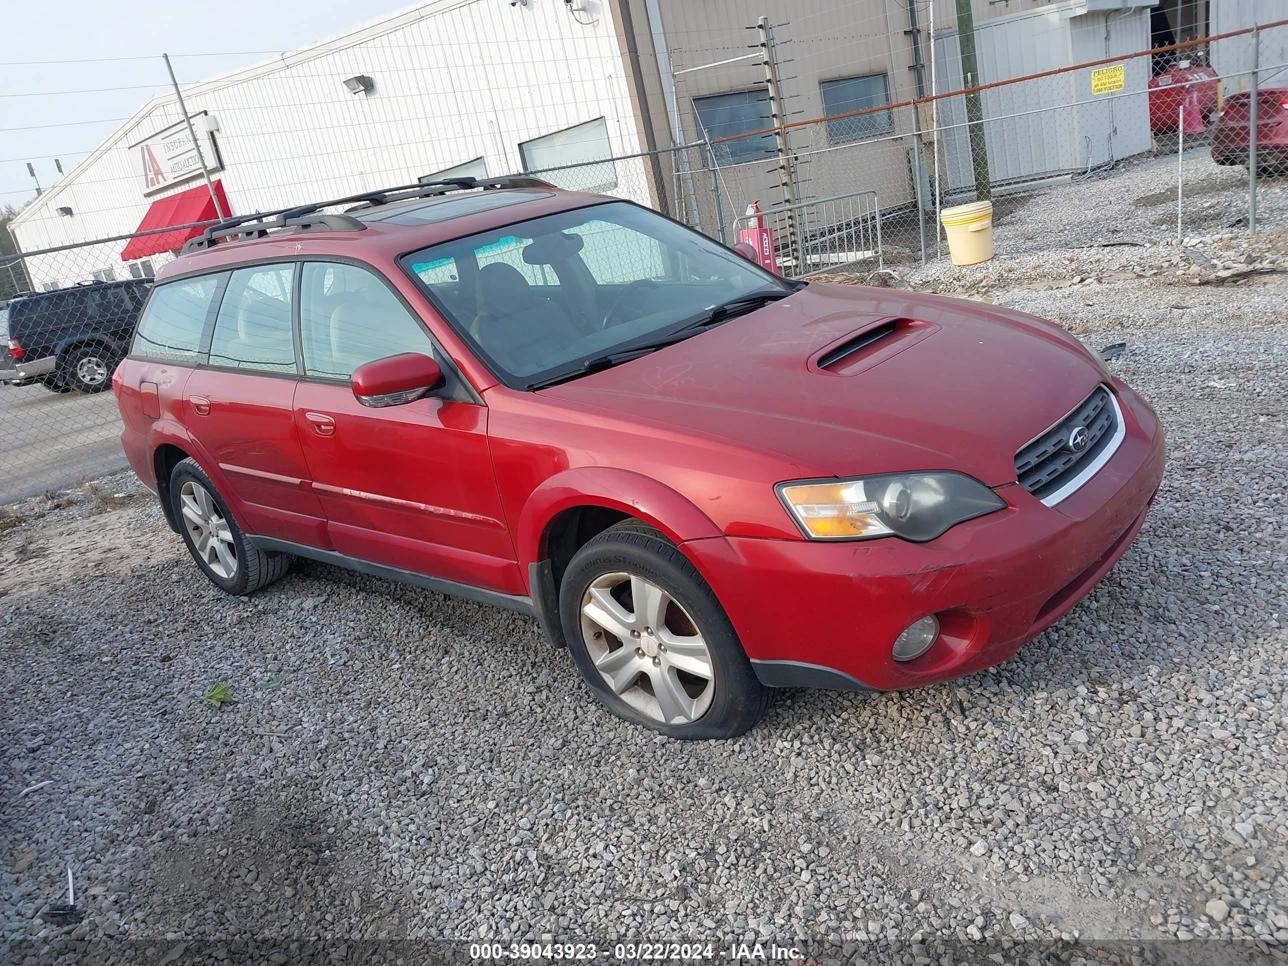 vin: 4S4BP67C454356129 4S4BP67C454356129 2005 subaru outback 2500 for Sale in 37404, 2801 Asbury Park St, Chattanooga, Tennessee, USA